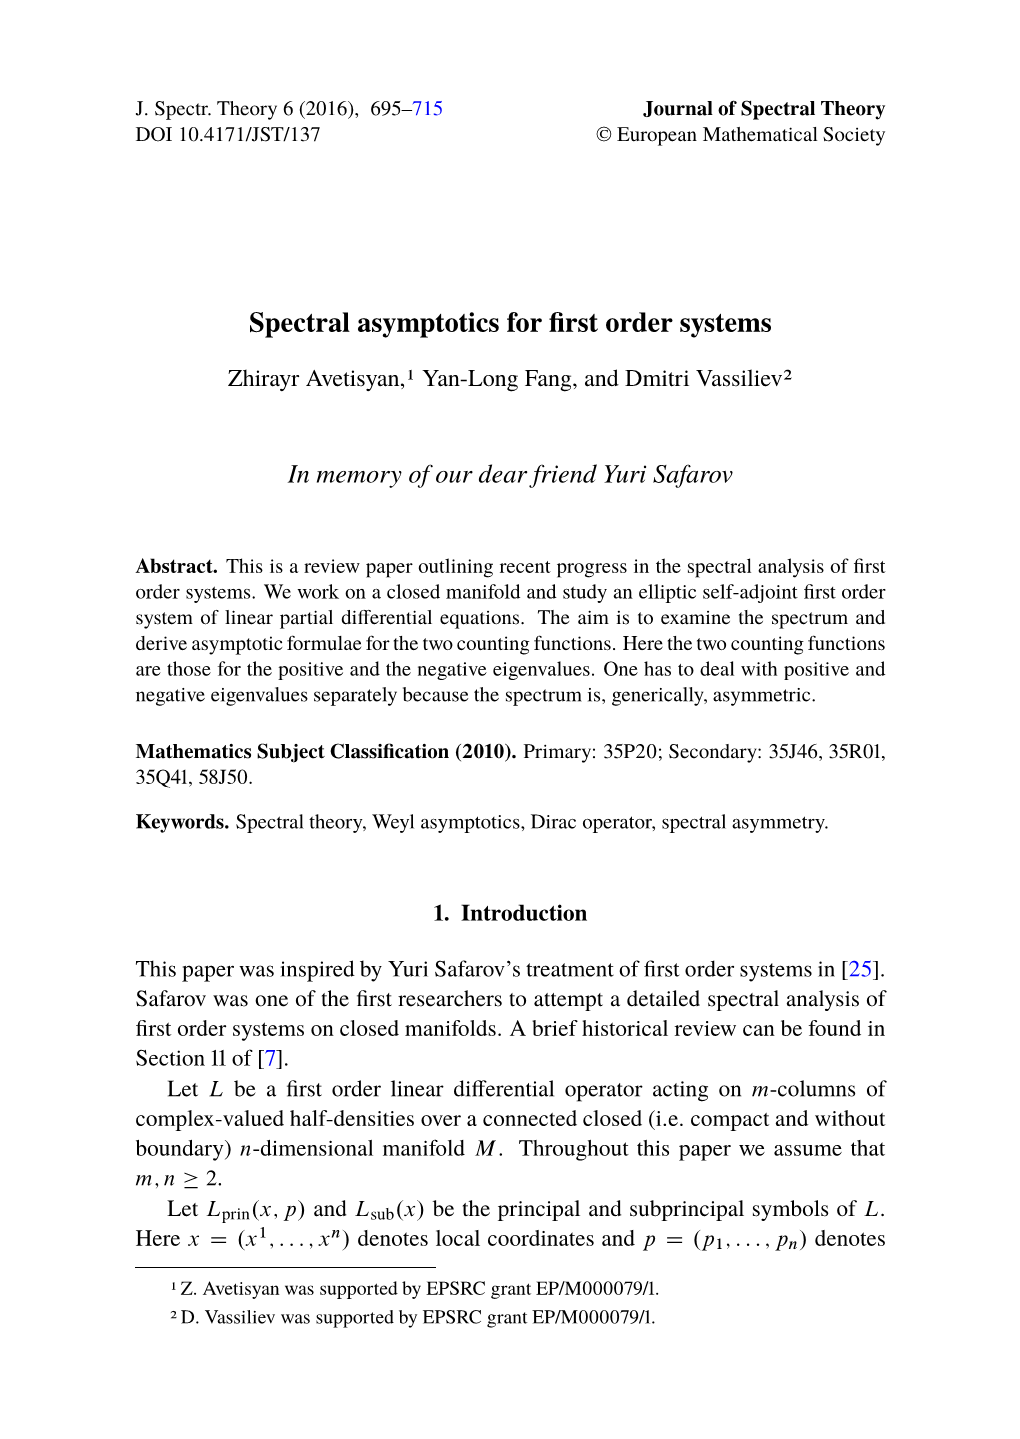 Spectral Asymptotics for First Order Systems